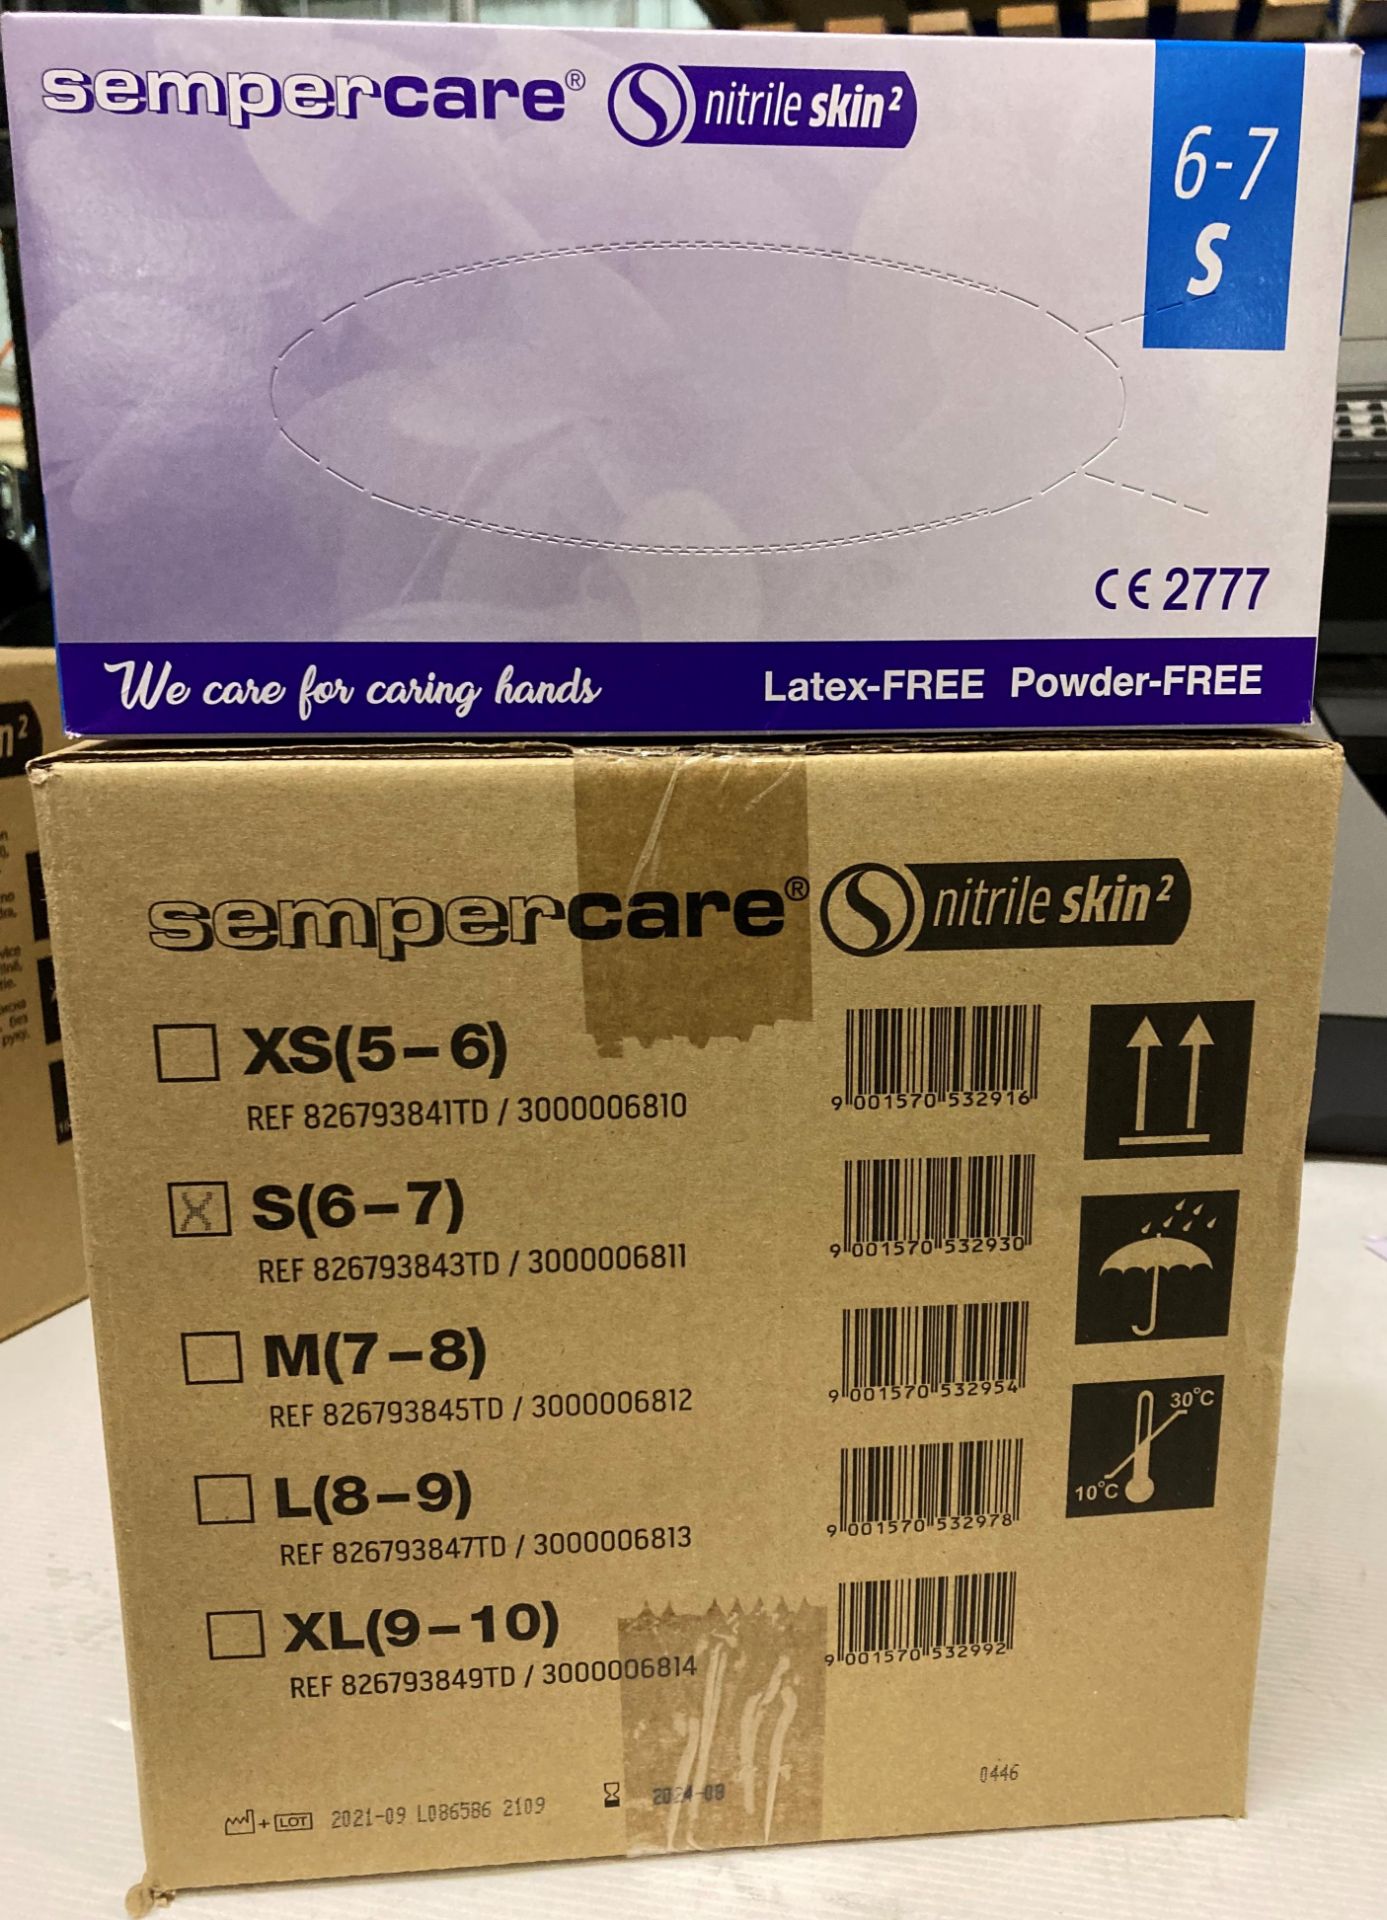 10 x boxes of Sempercare nitrile skin 2 exam gloves size small (200 gloves per box - 1 x outer box)